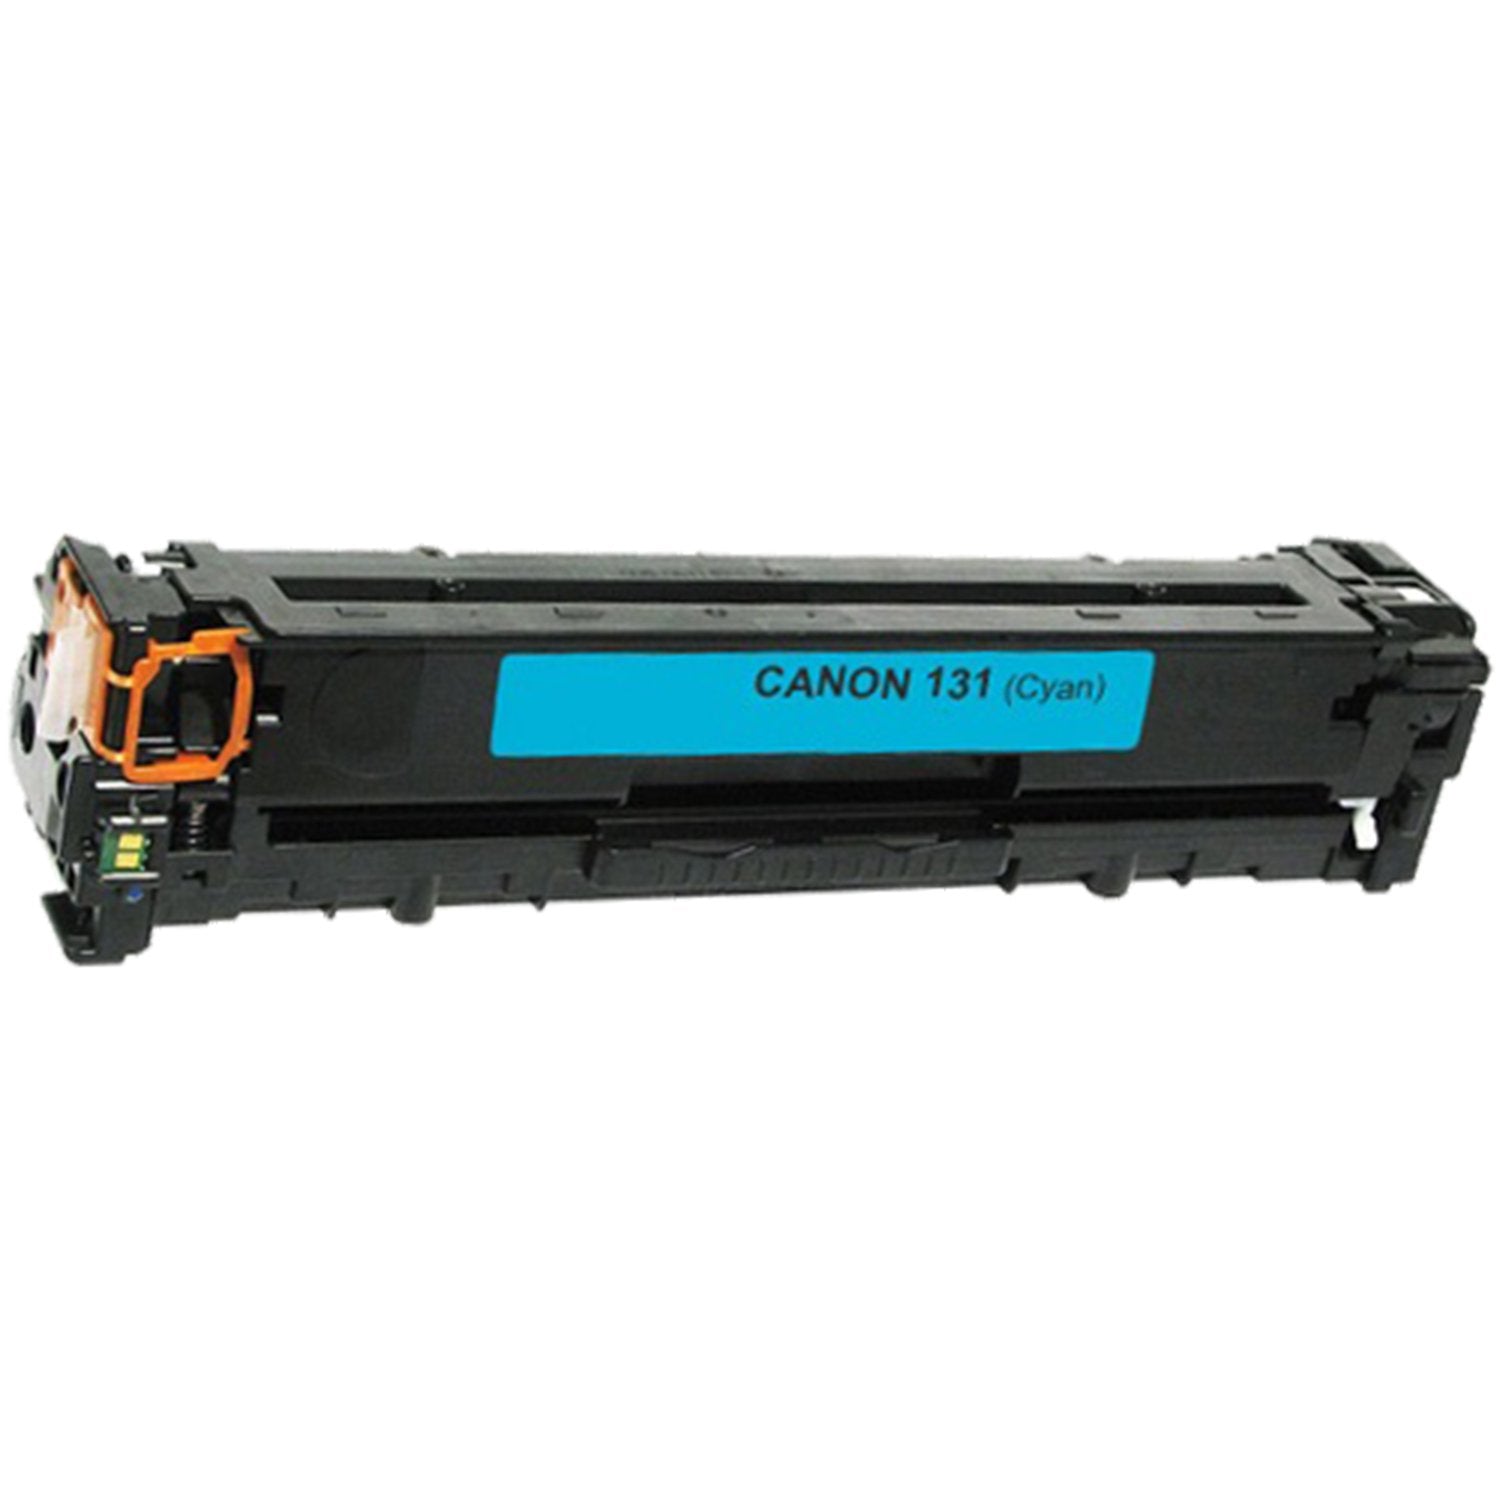 Absolute Toner Compatible Canon 131 Cyan Toner Cartridge | Absolute Toner Canon Toner Cartridges